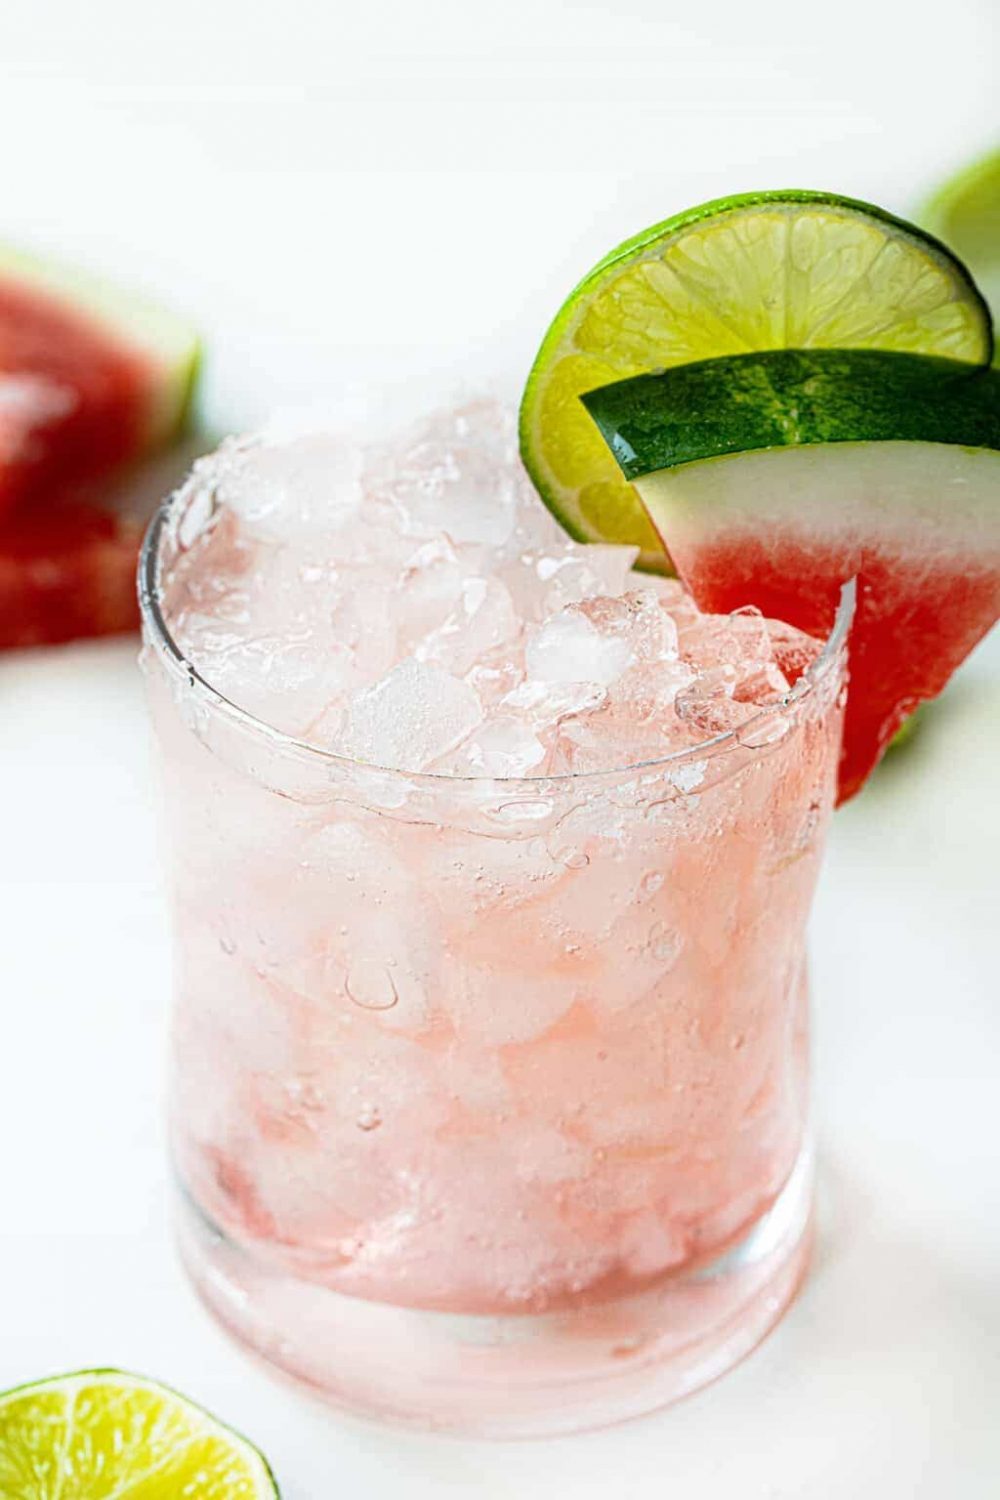 Summertime Bliss: Crafting the Perfect Watermelon Refresher